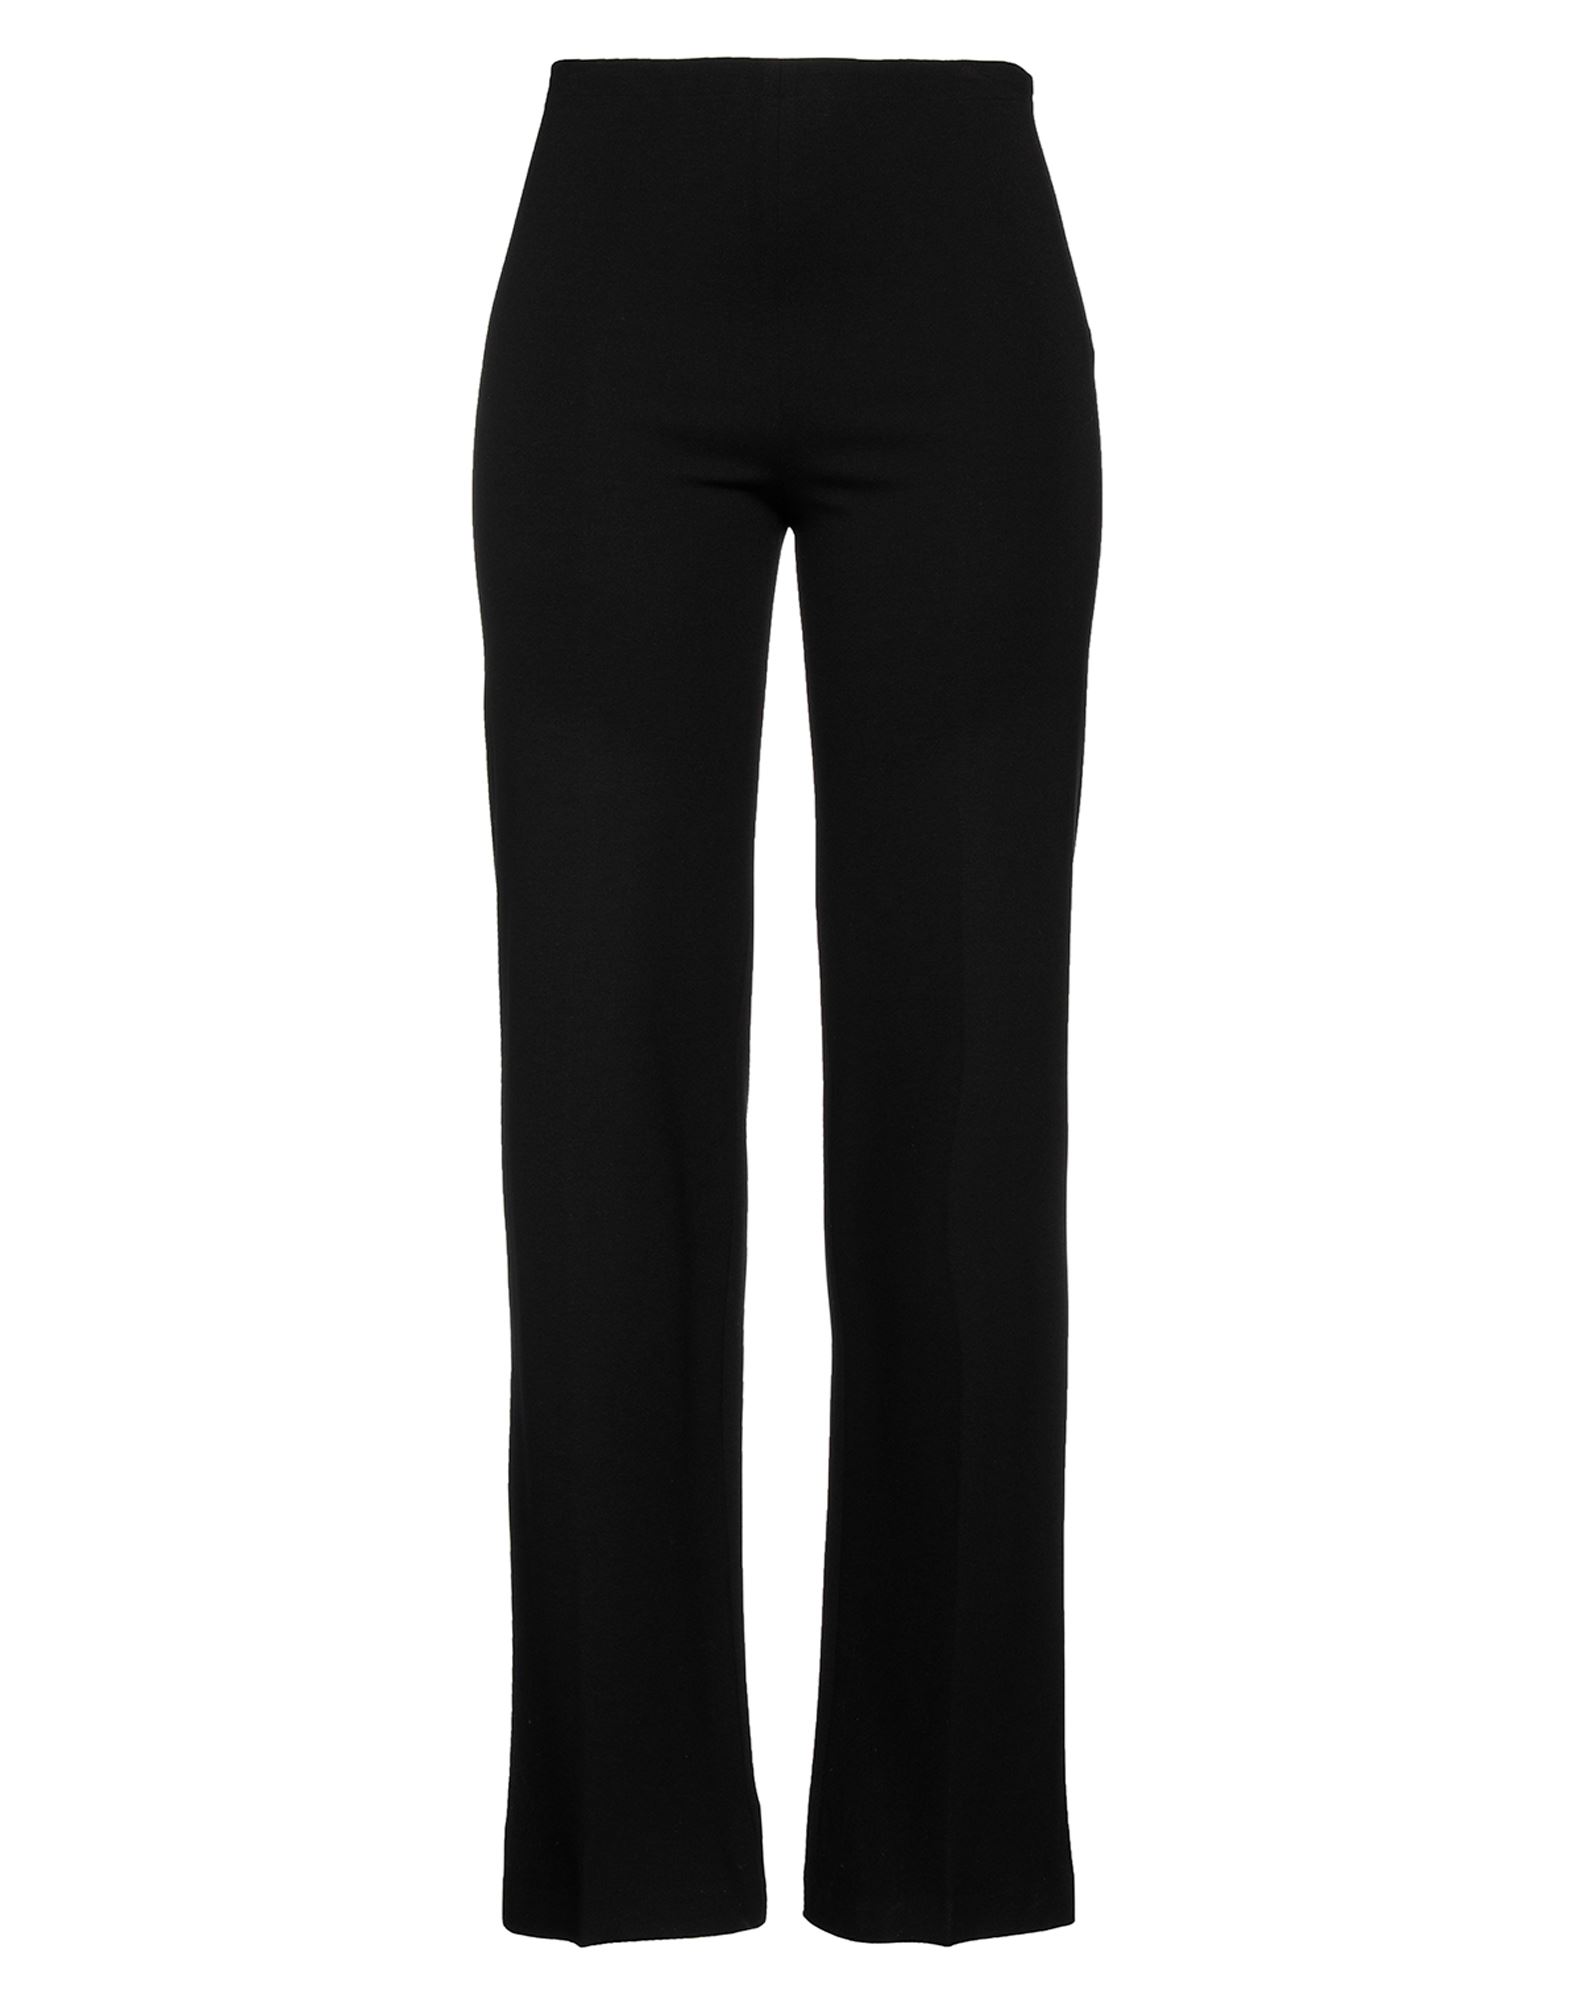 Semicouture Pants In Black